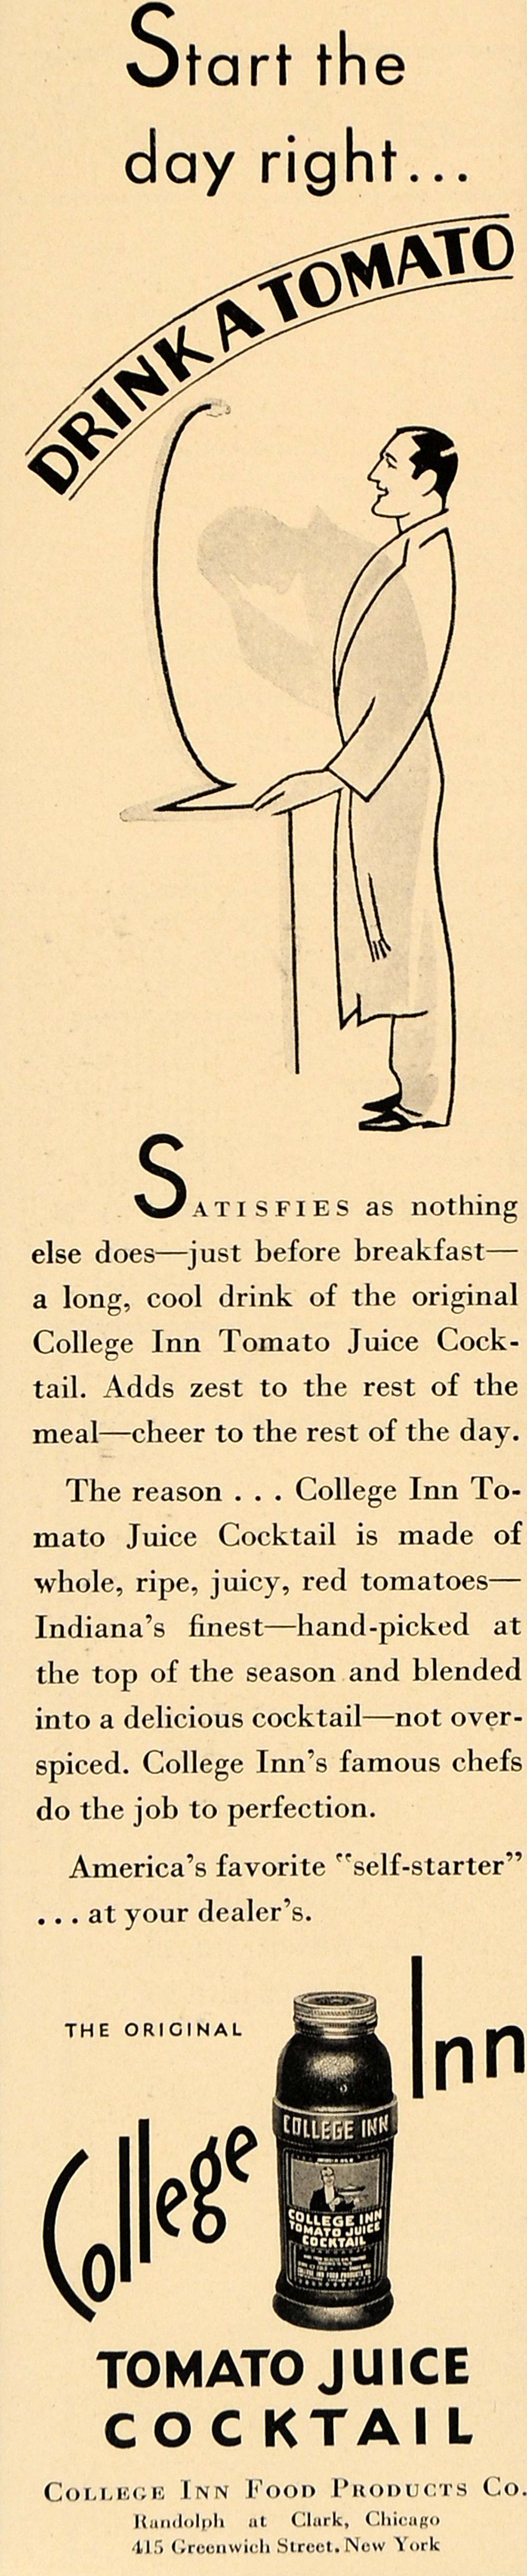 1931 Ad Chicago IL Tomato Juice Cocktail College Inn Food Products Vegetable F2B